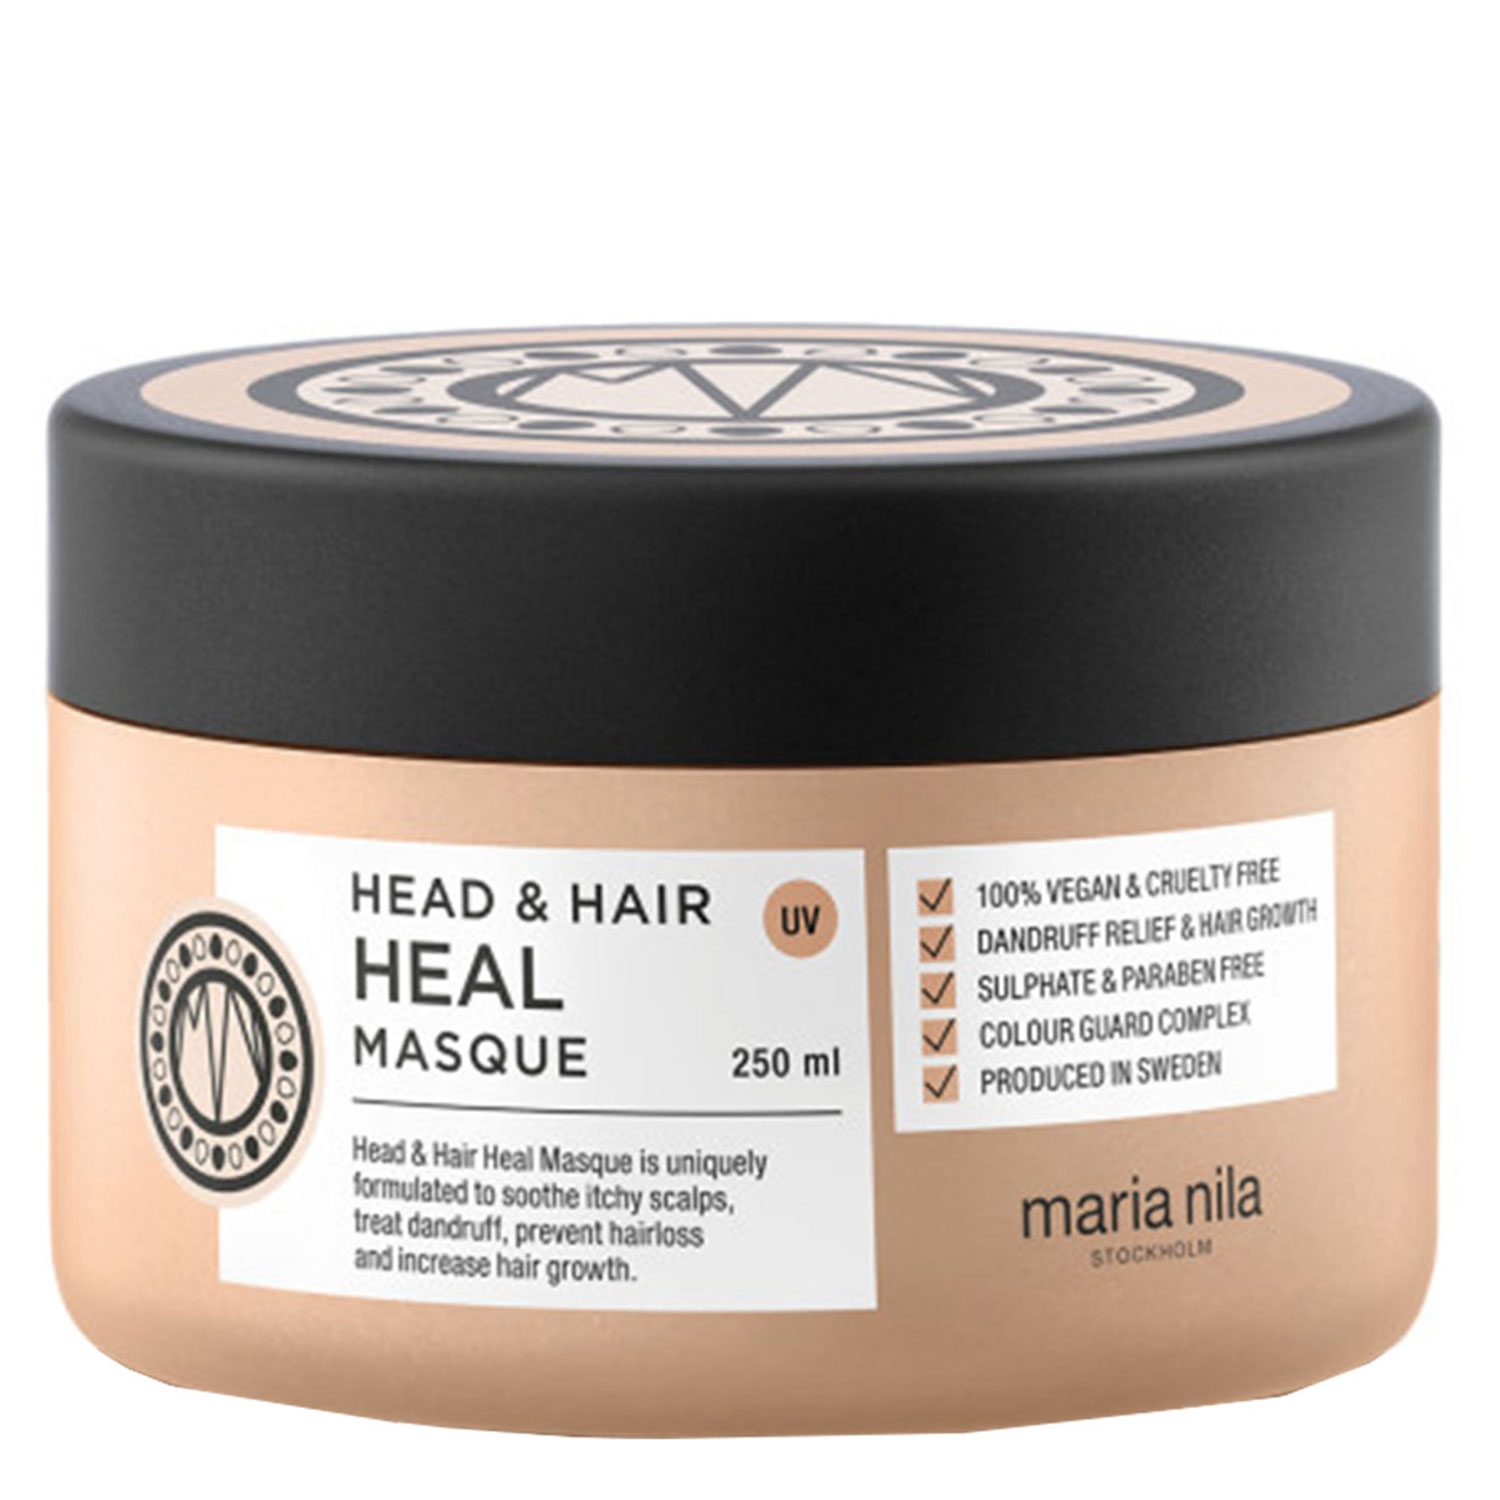 Product image from Care & Style - Head & Hair Heal Masque